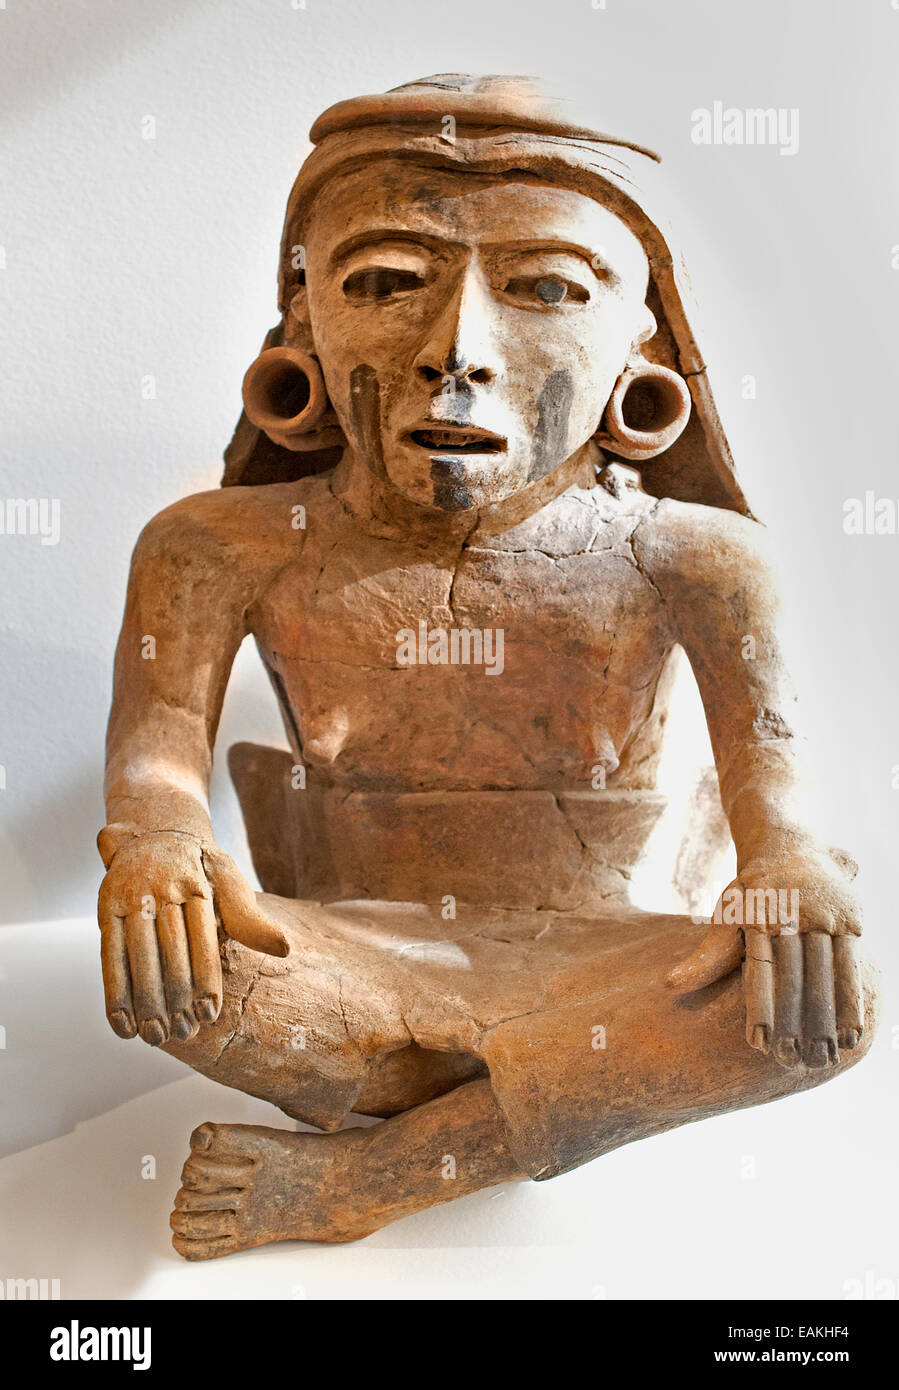 Sitting Person Classic Veracruz culture ( Gulf Coast )  that existed from roughly 100 BC to 1000 Mexico Mexican Stock Photo